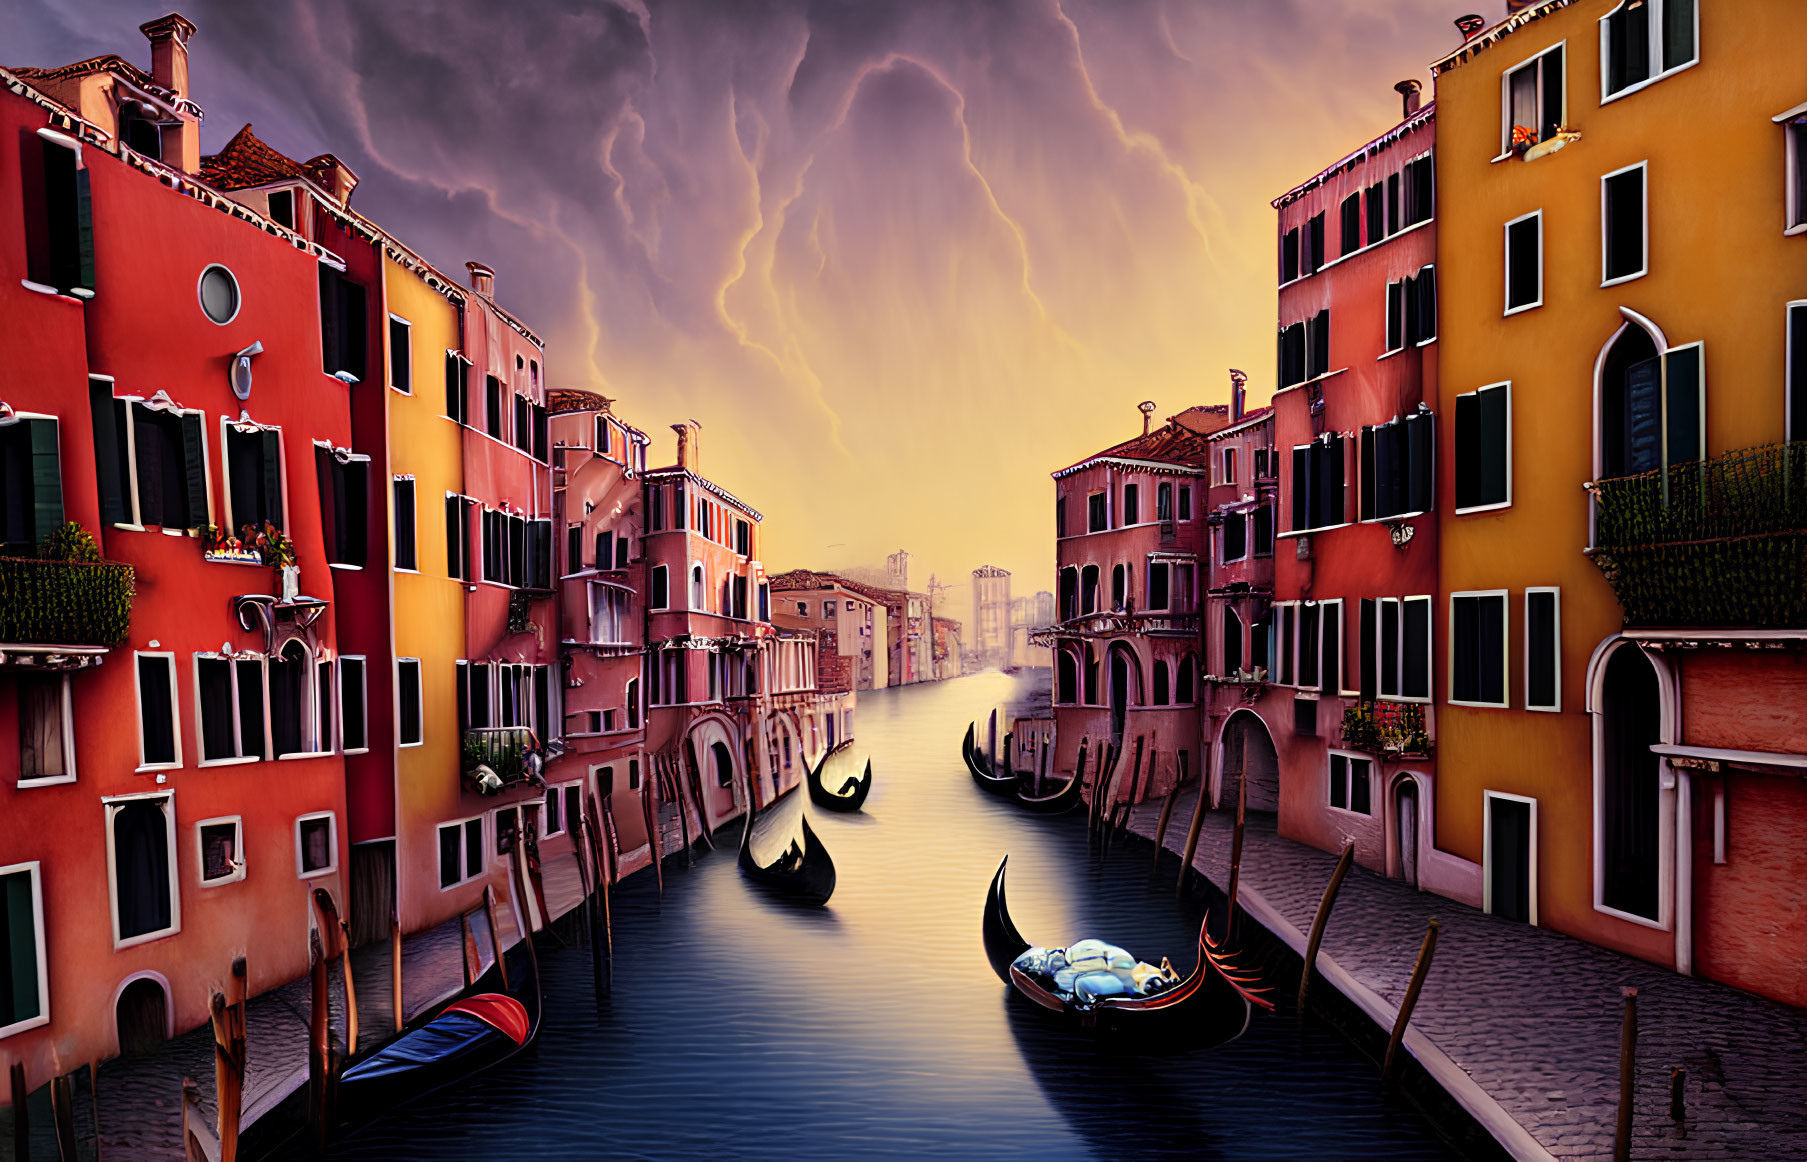 Venice Canal with Gondolas Amid Colorful Buildings and Lightning Sky